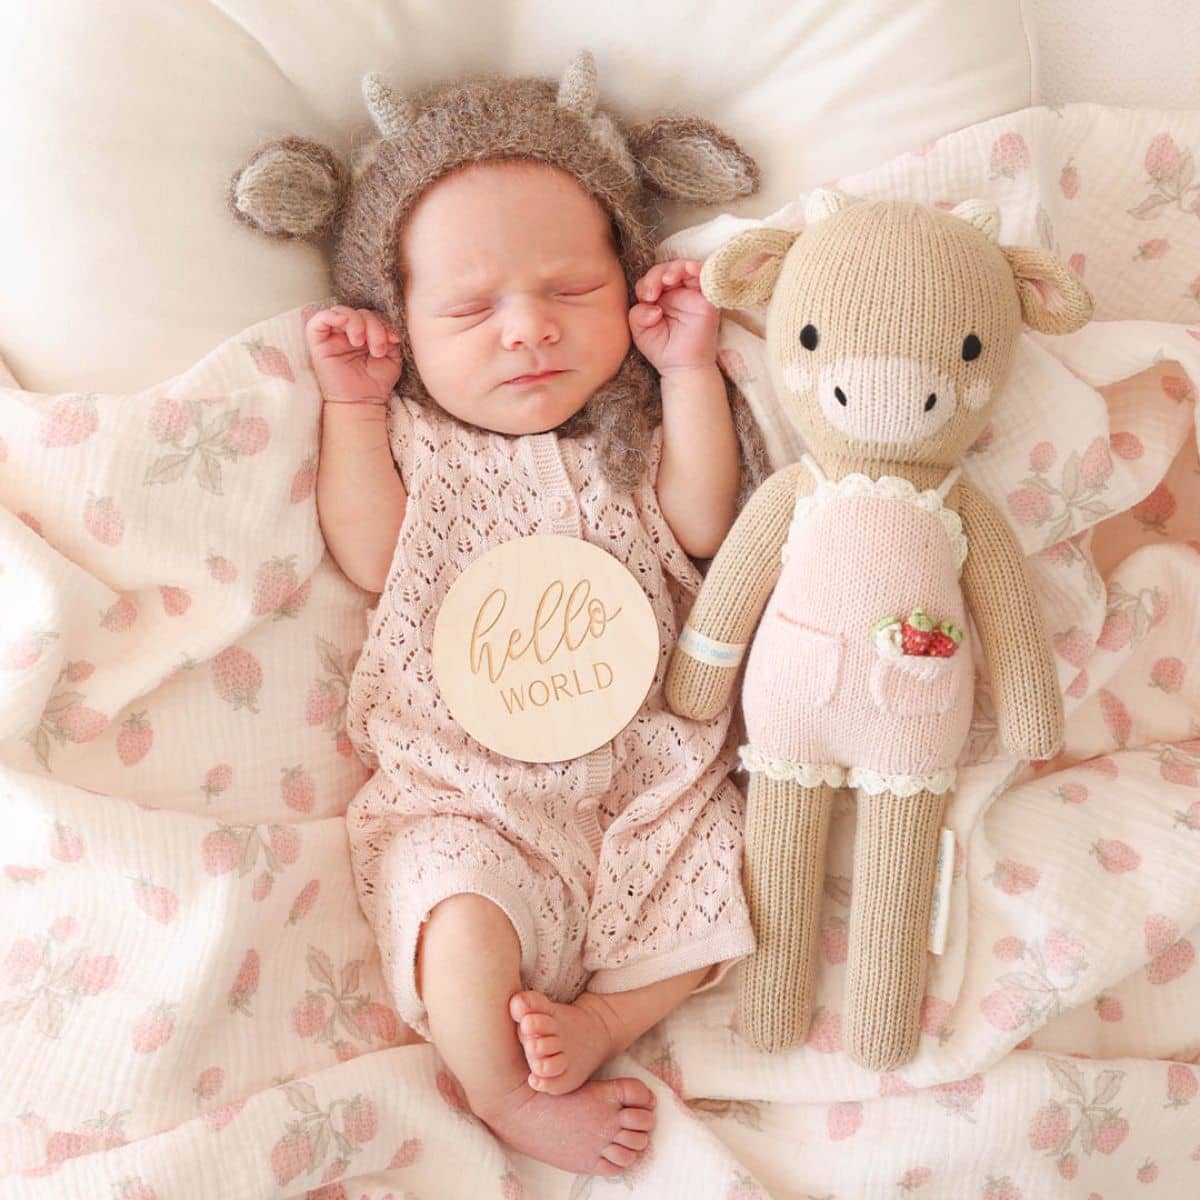 Cuddle + Kind Hand-Knit Doll - Ava the Cow (Powder Pink)